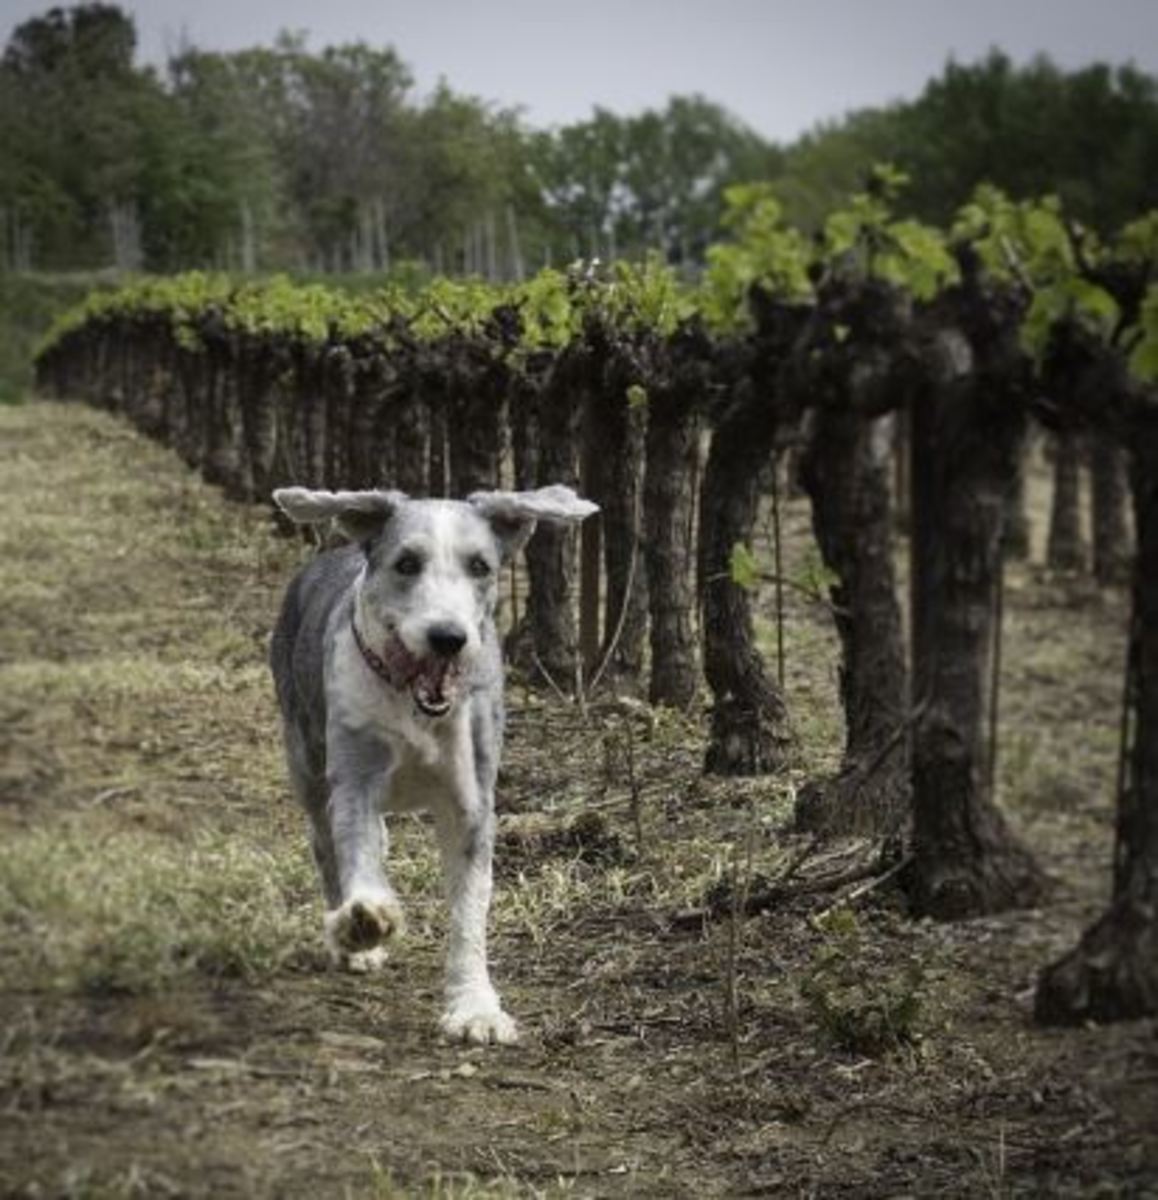 are wild grapes poisonous to dogs